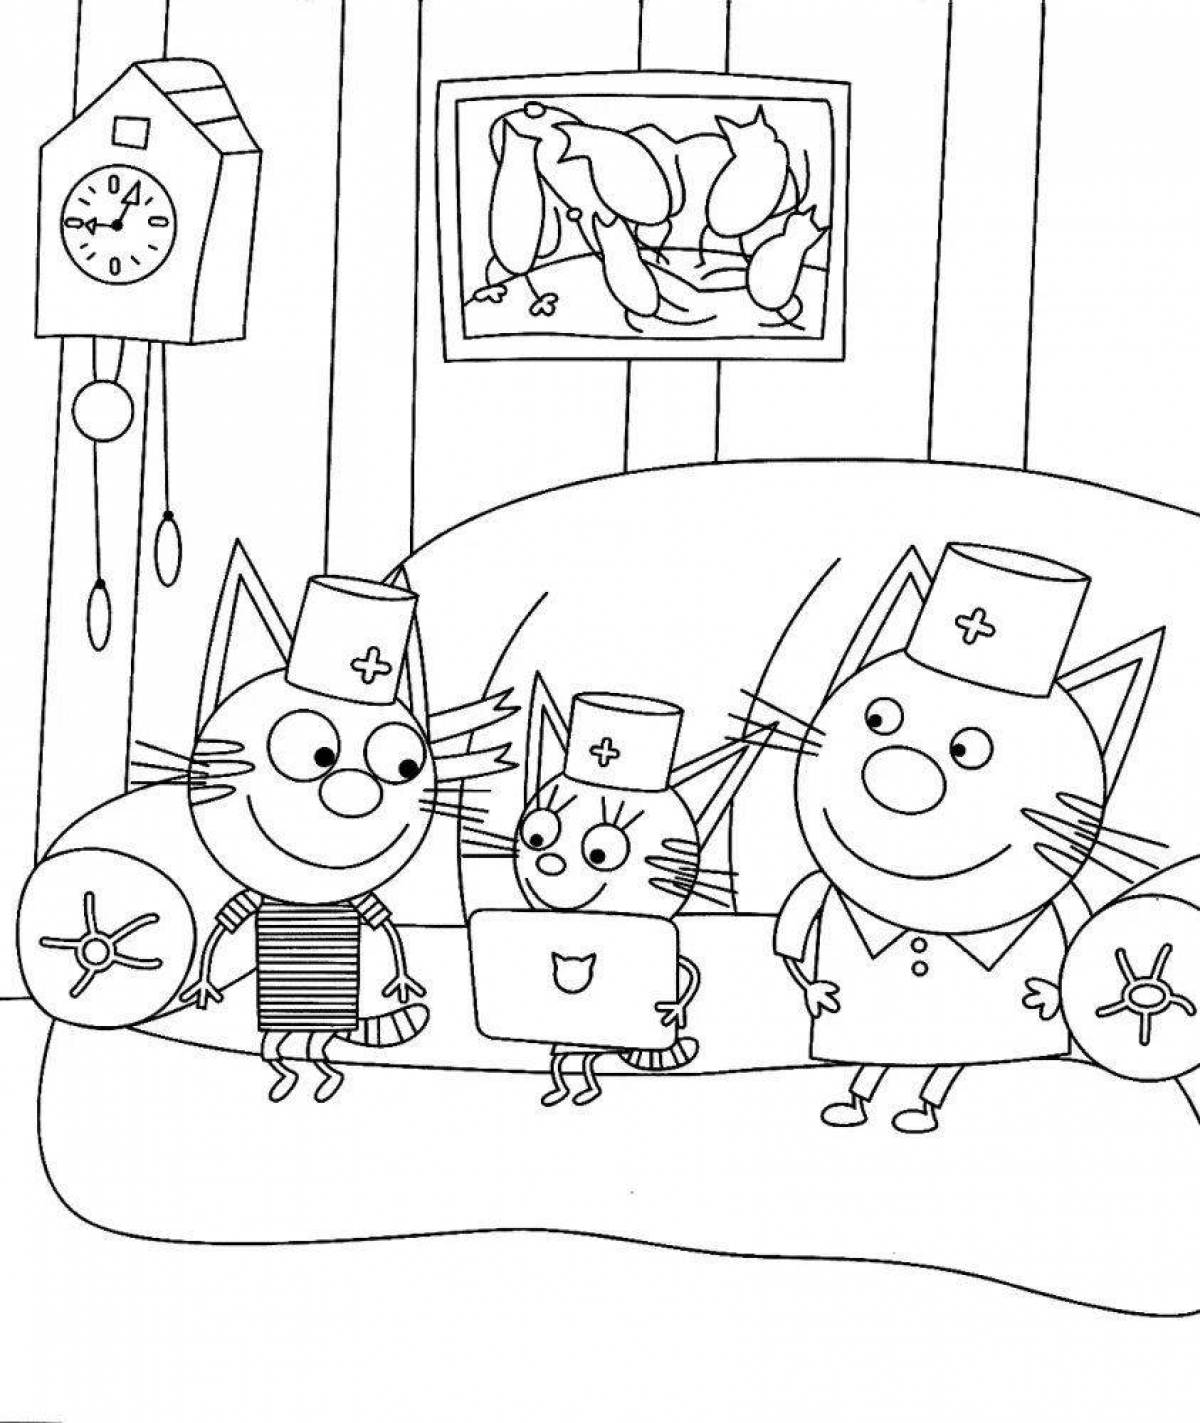 Coloring book merry new year three cats